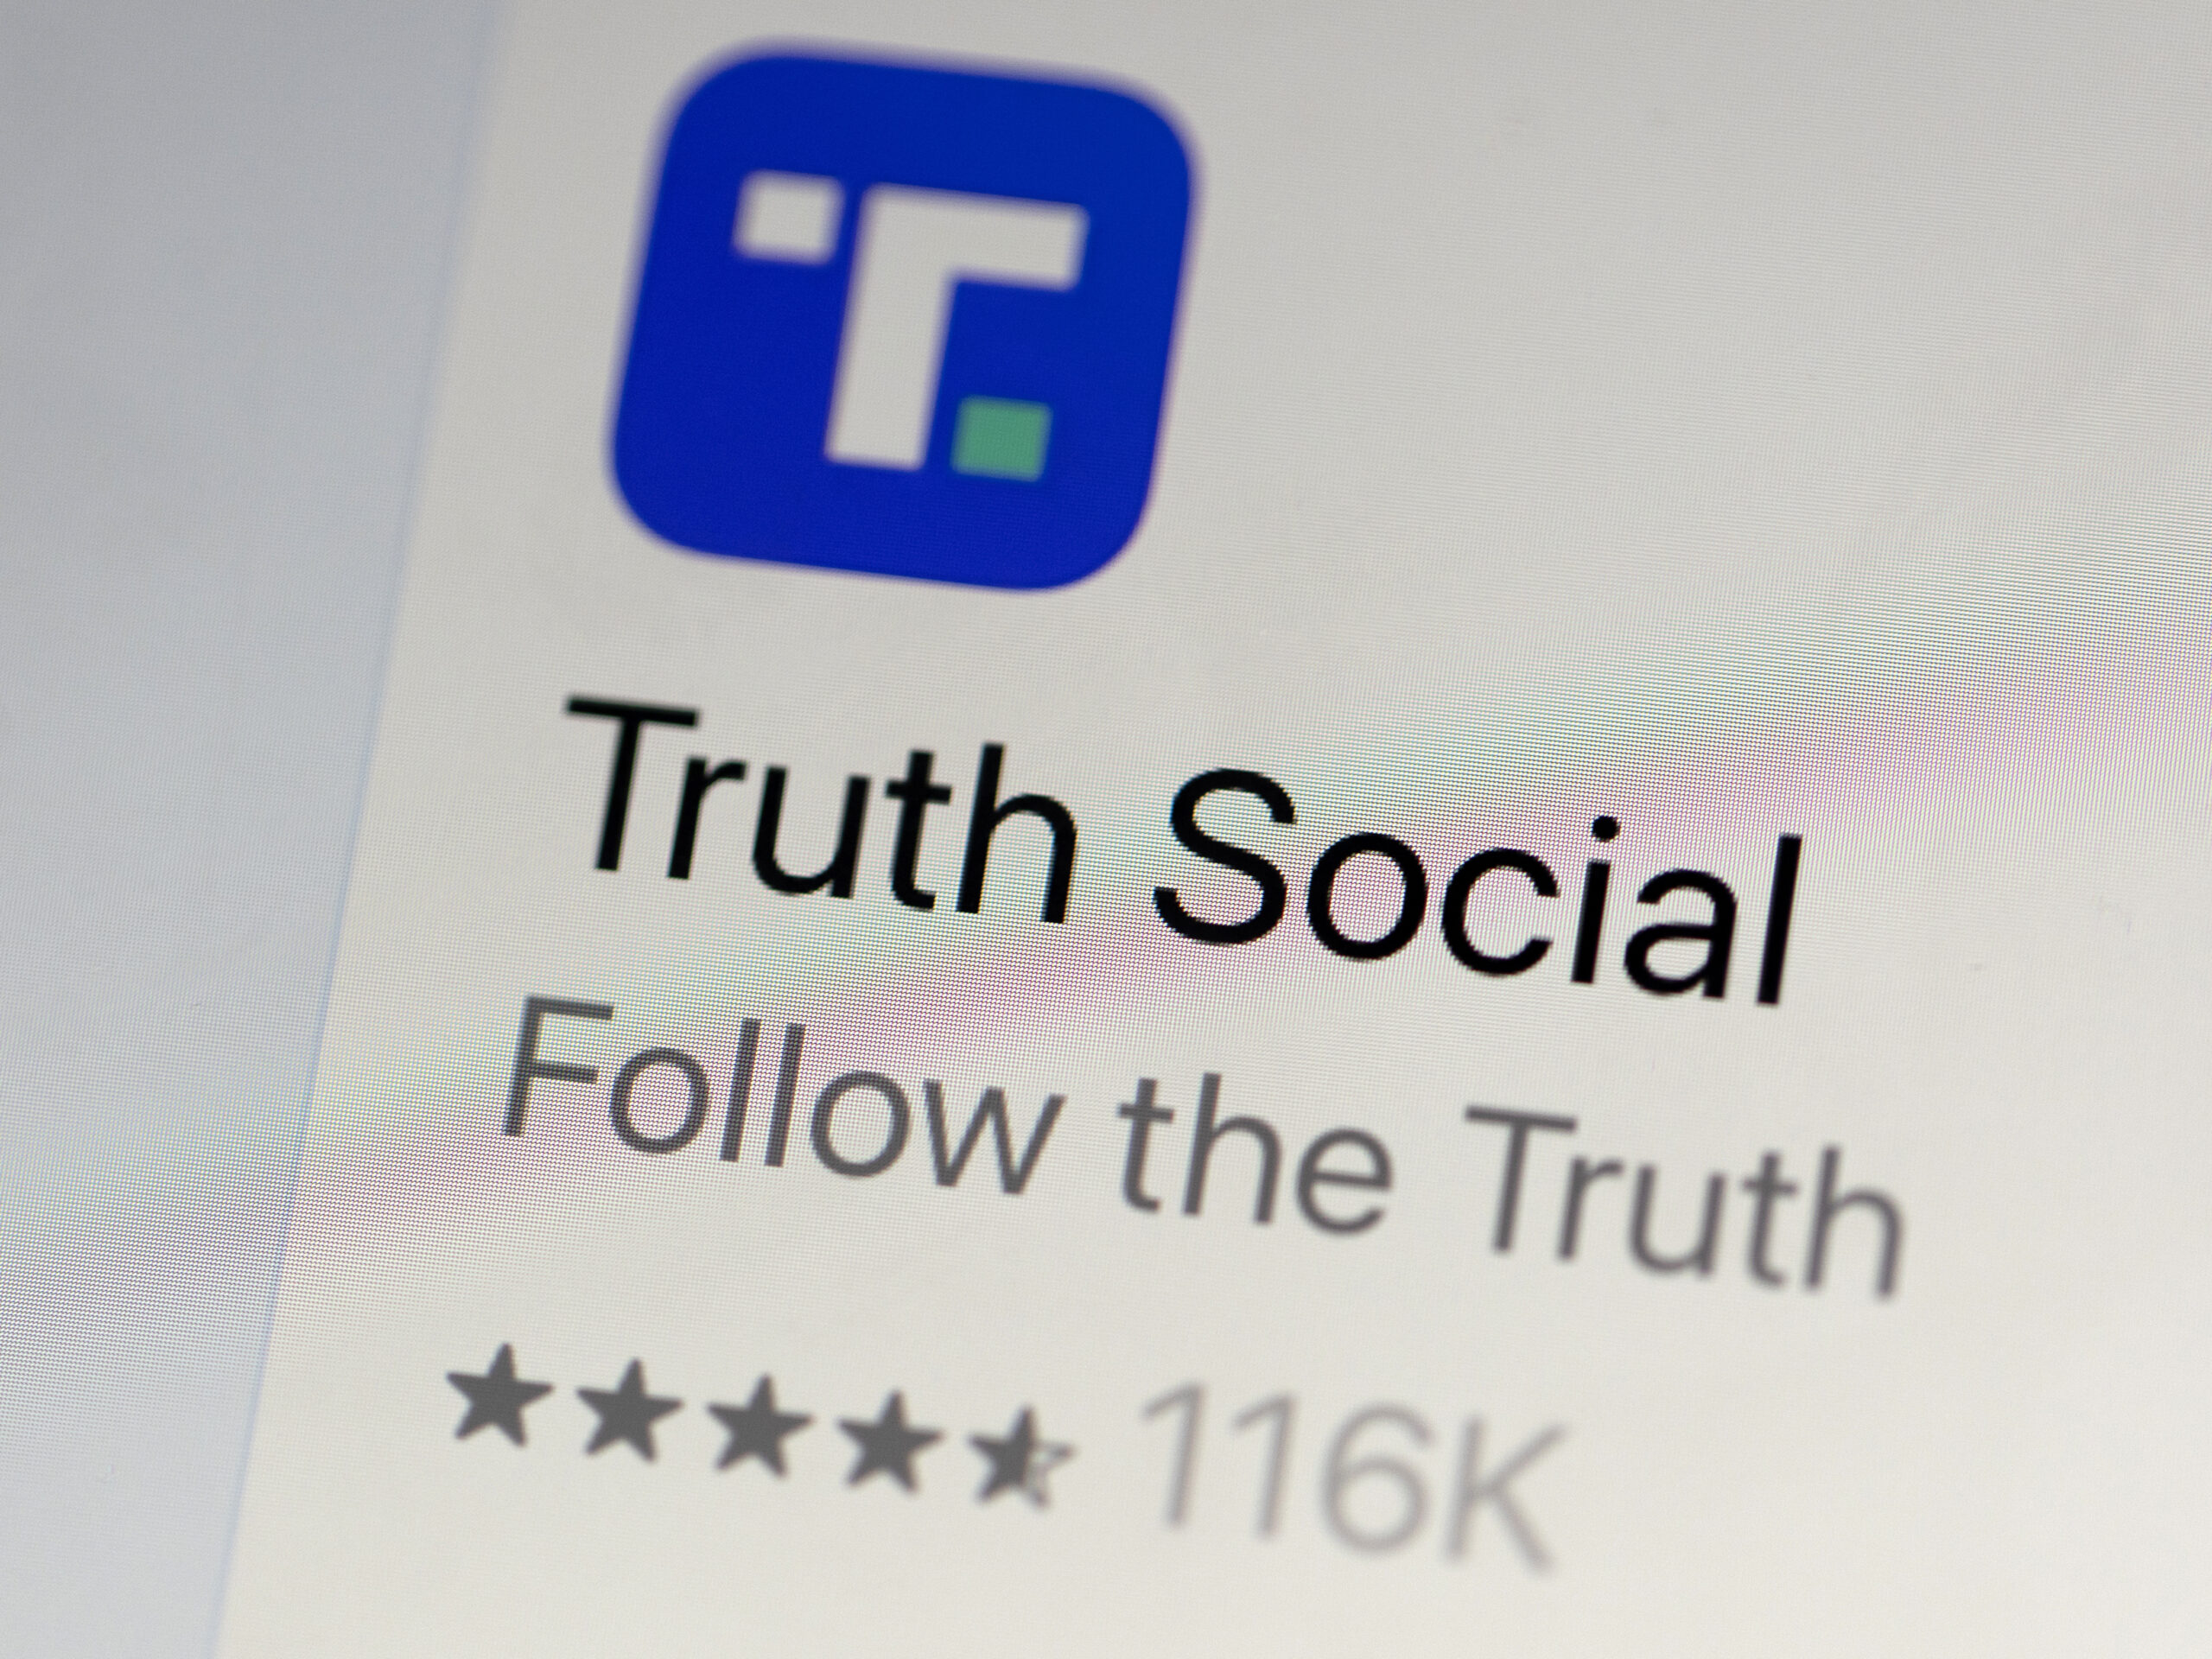 Trump’s Truth Social shares are plunging again, erasing billions of dollars in value